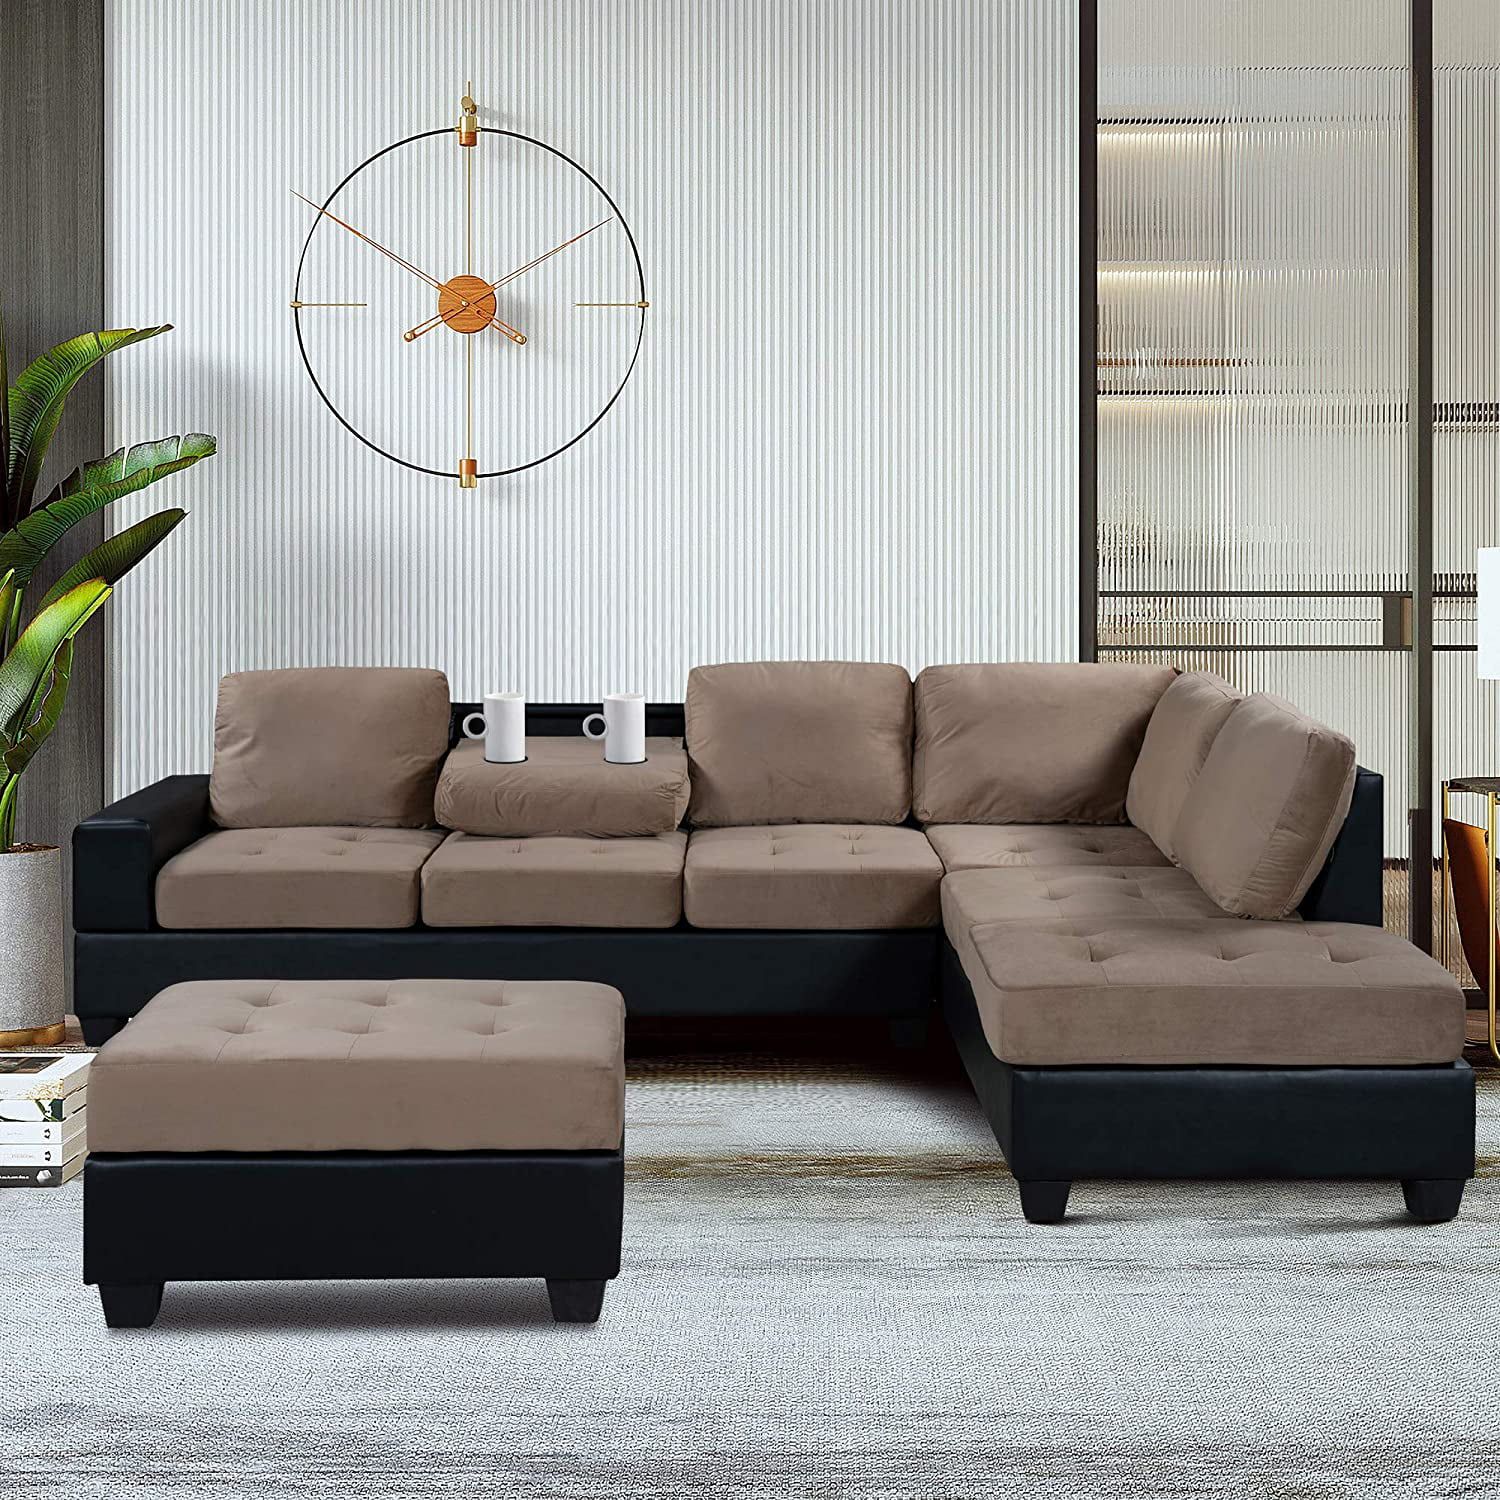 3 Piece Convertible Sectional Sofa L Shaped Couch With Reversible For L Shape Couches With Reversible Chaises (Gallery 7 of 20)